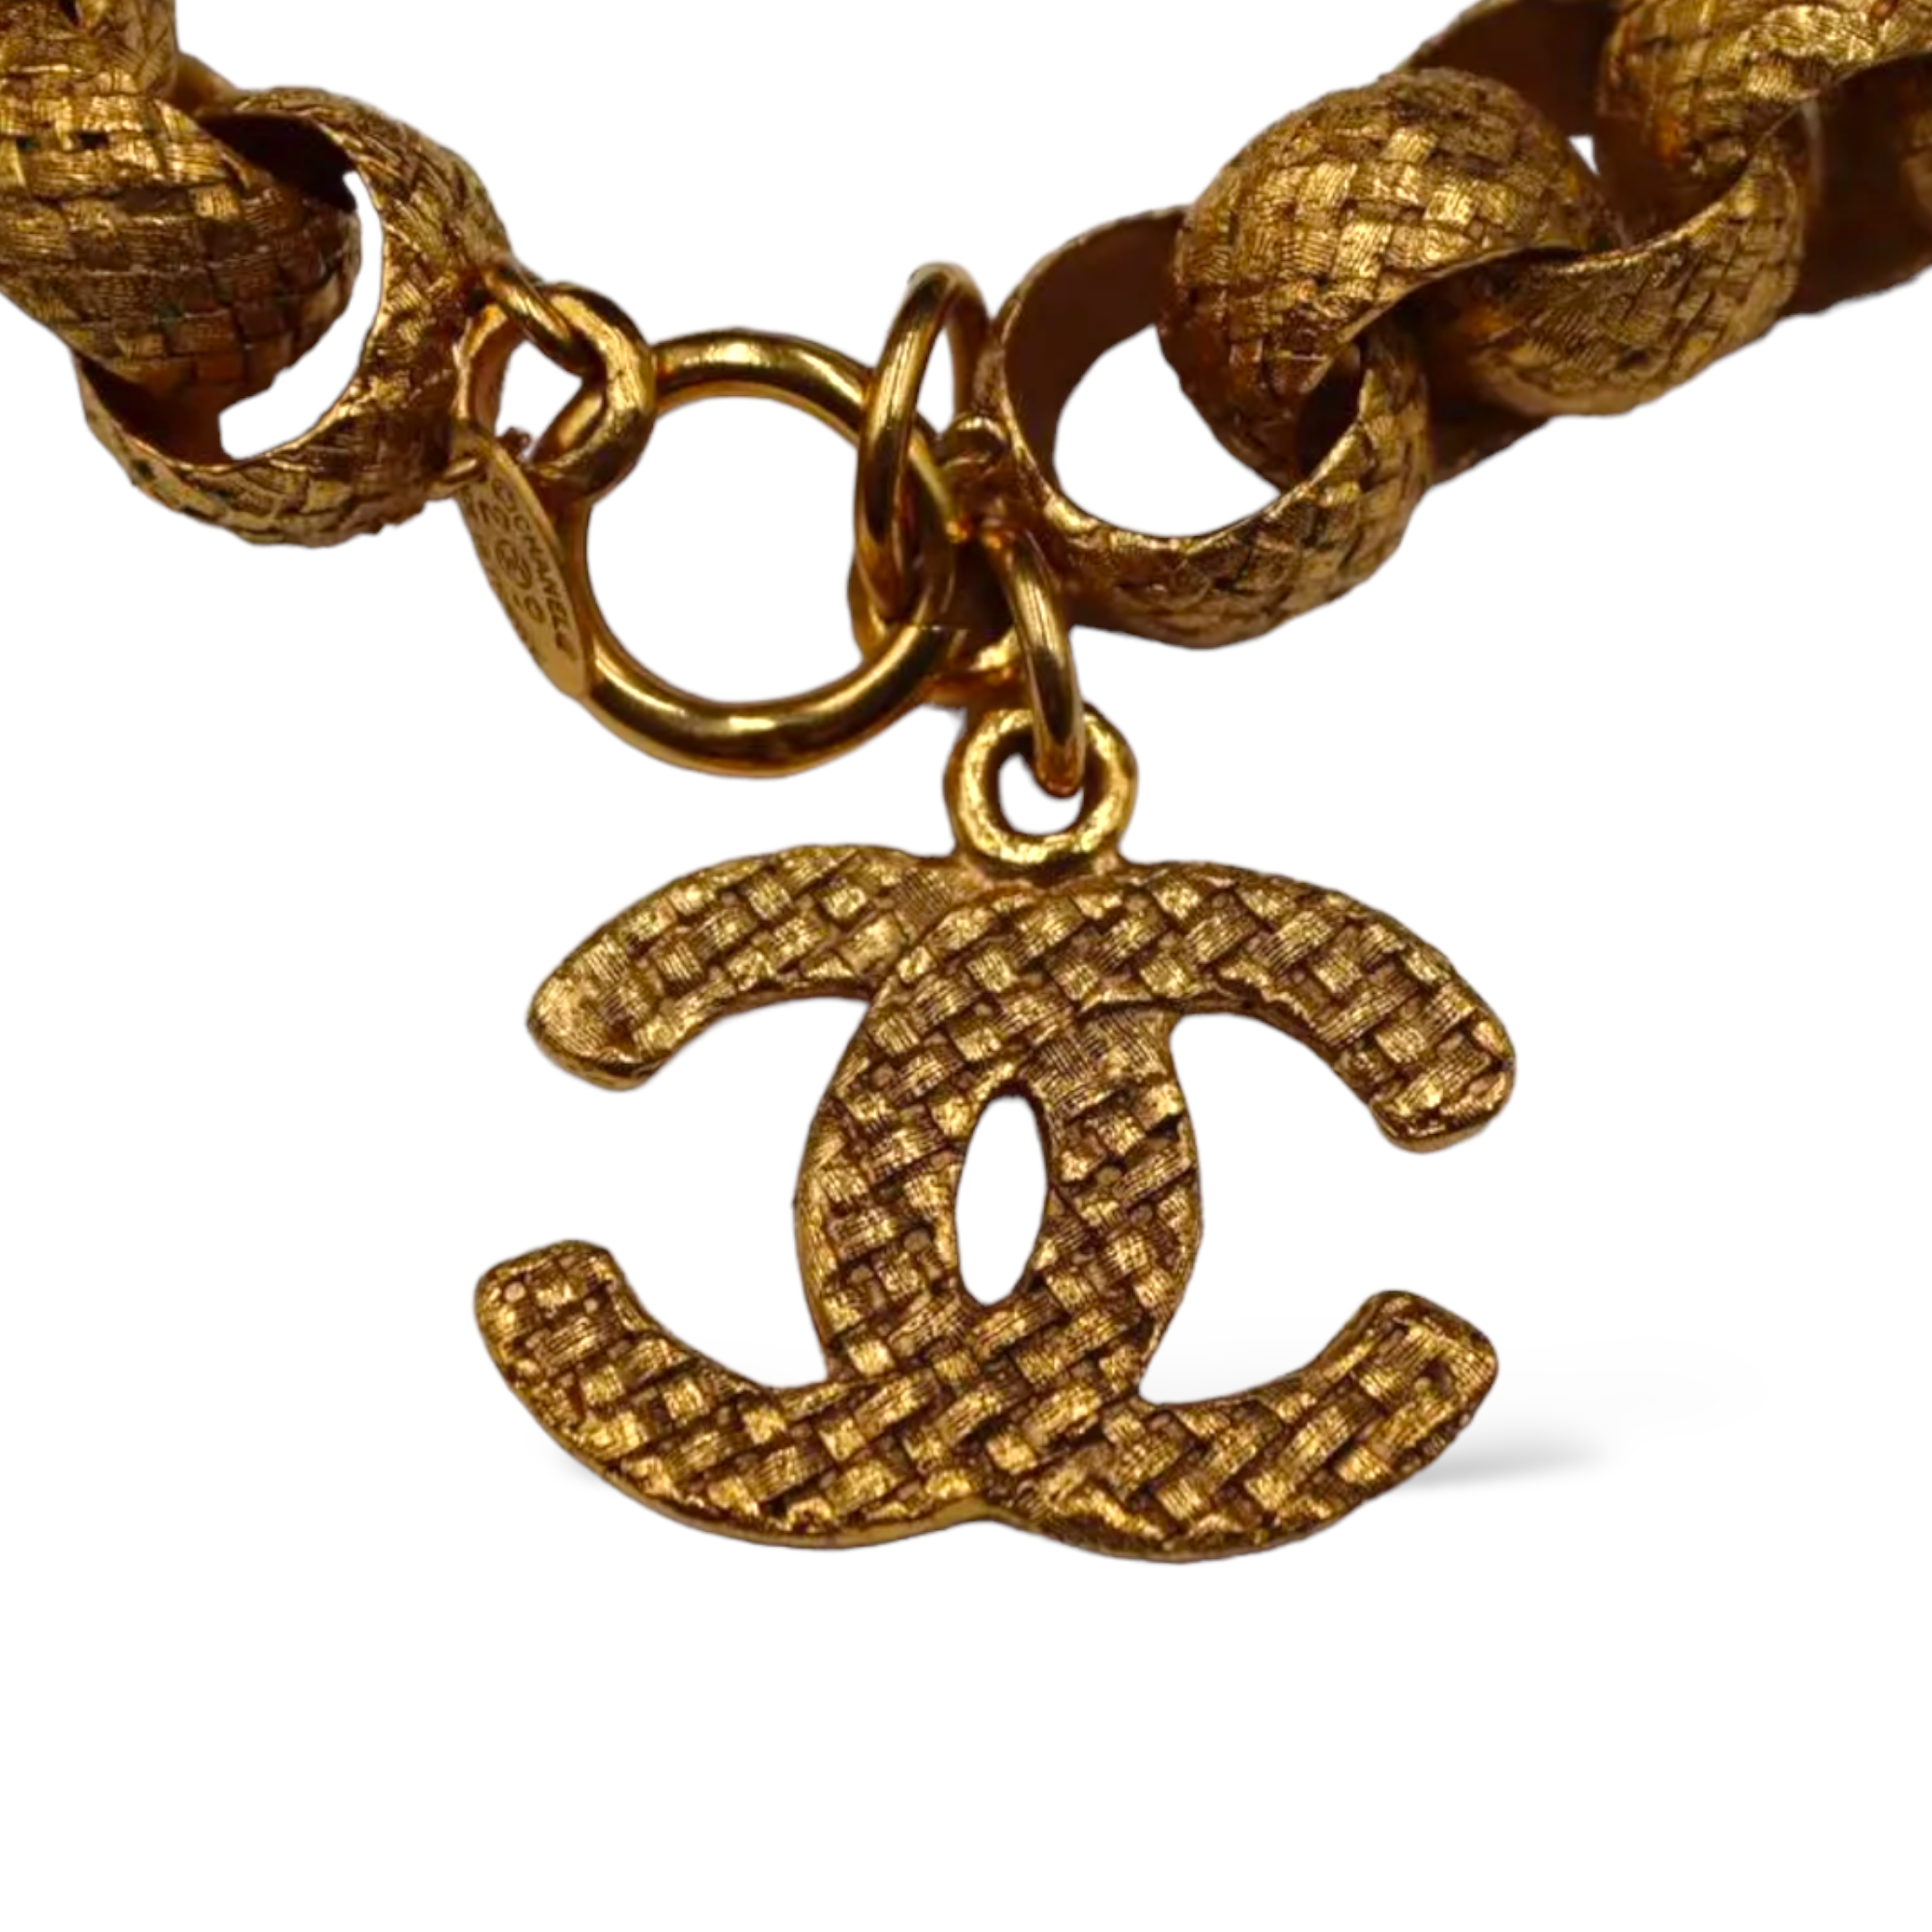 CHANEL Vintage  Gold-Tone Woven Rope Chain-Link Necklace & Large "CC" Pendant